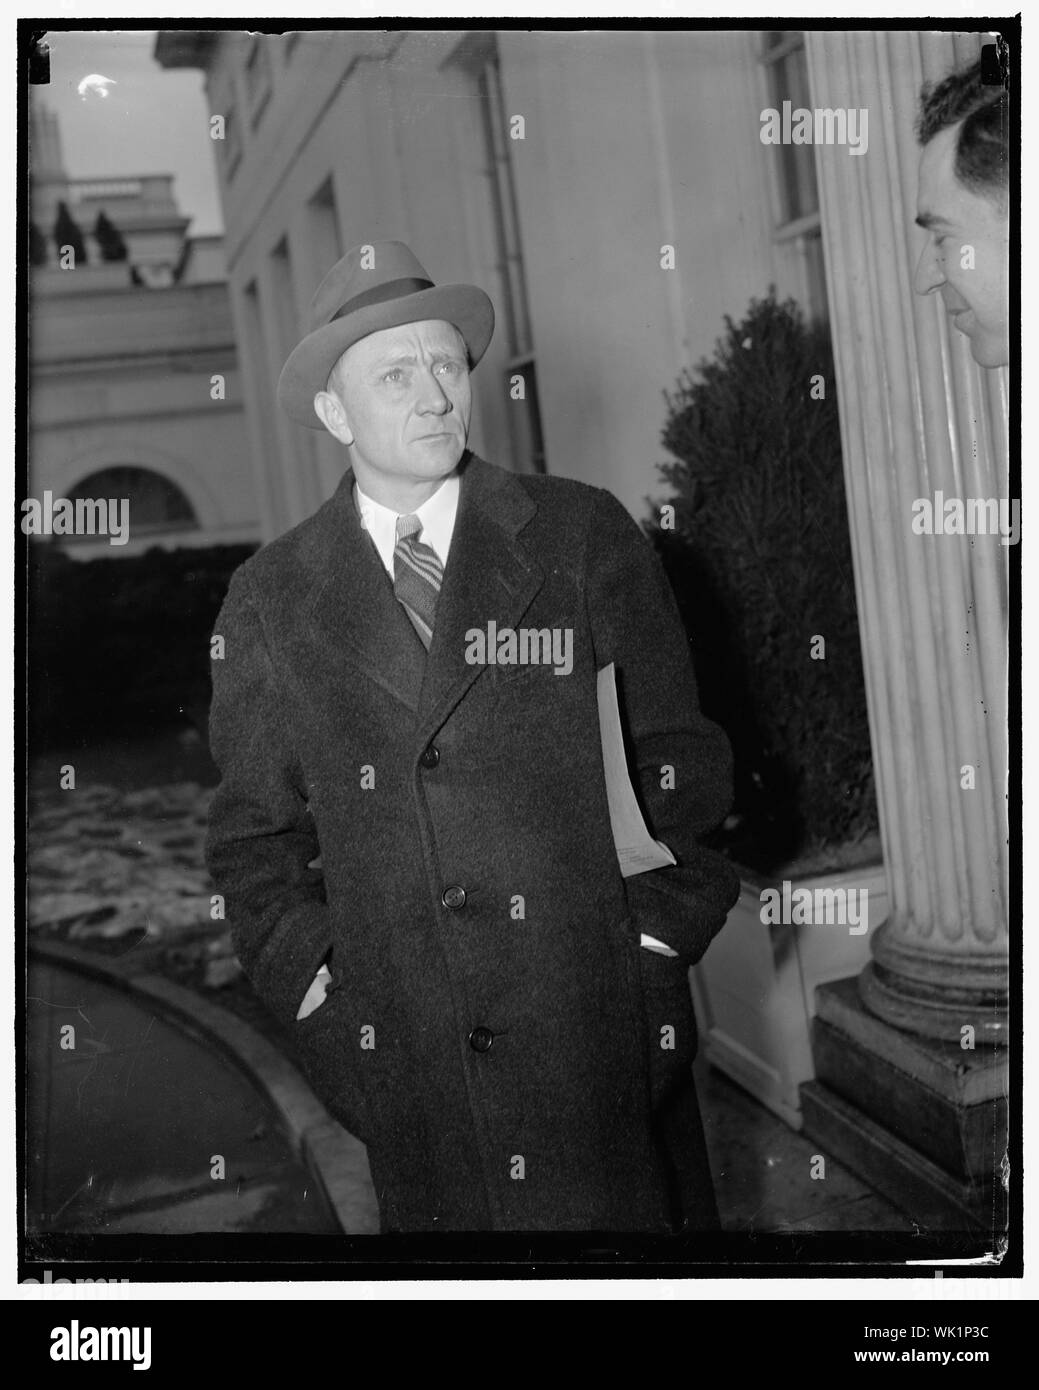 Informs President SEC ready to proceed with investigation of insurance companies. Washington, D.C., Jan. 24. William O. Douglas, Chairman of the Securities and Exchange Commission, leaving the White House today after reporting to President Roosevelt that the commission was ready to proceed with its investigation of insurance companies in connection with the present monopoly inquiry. He indicated the SEC would be concerned primarily with the investment and managerial phases of insurance company operation and said approximately $300,000 would be required to carry out the work in this calendar ye Stock Photo